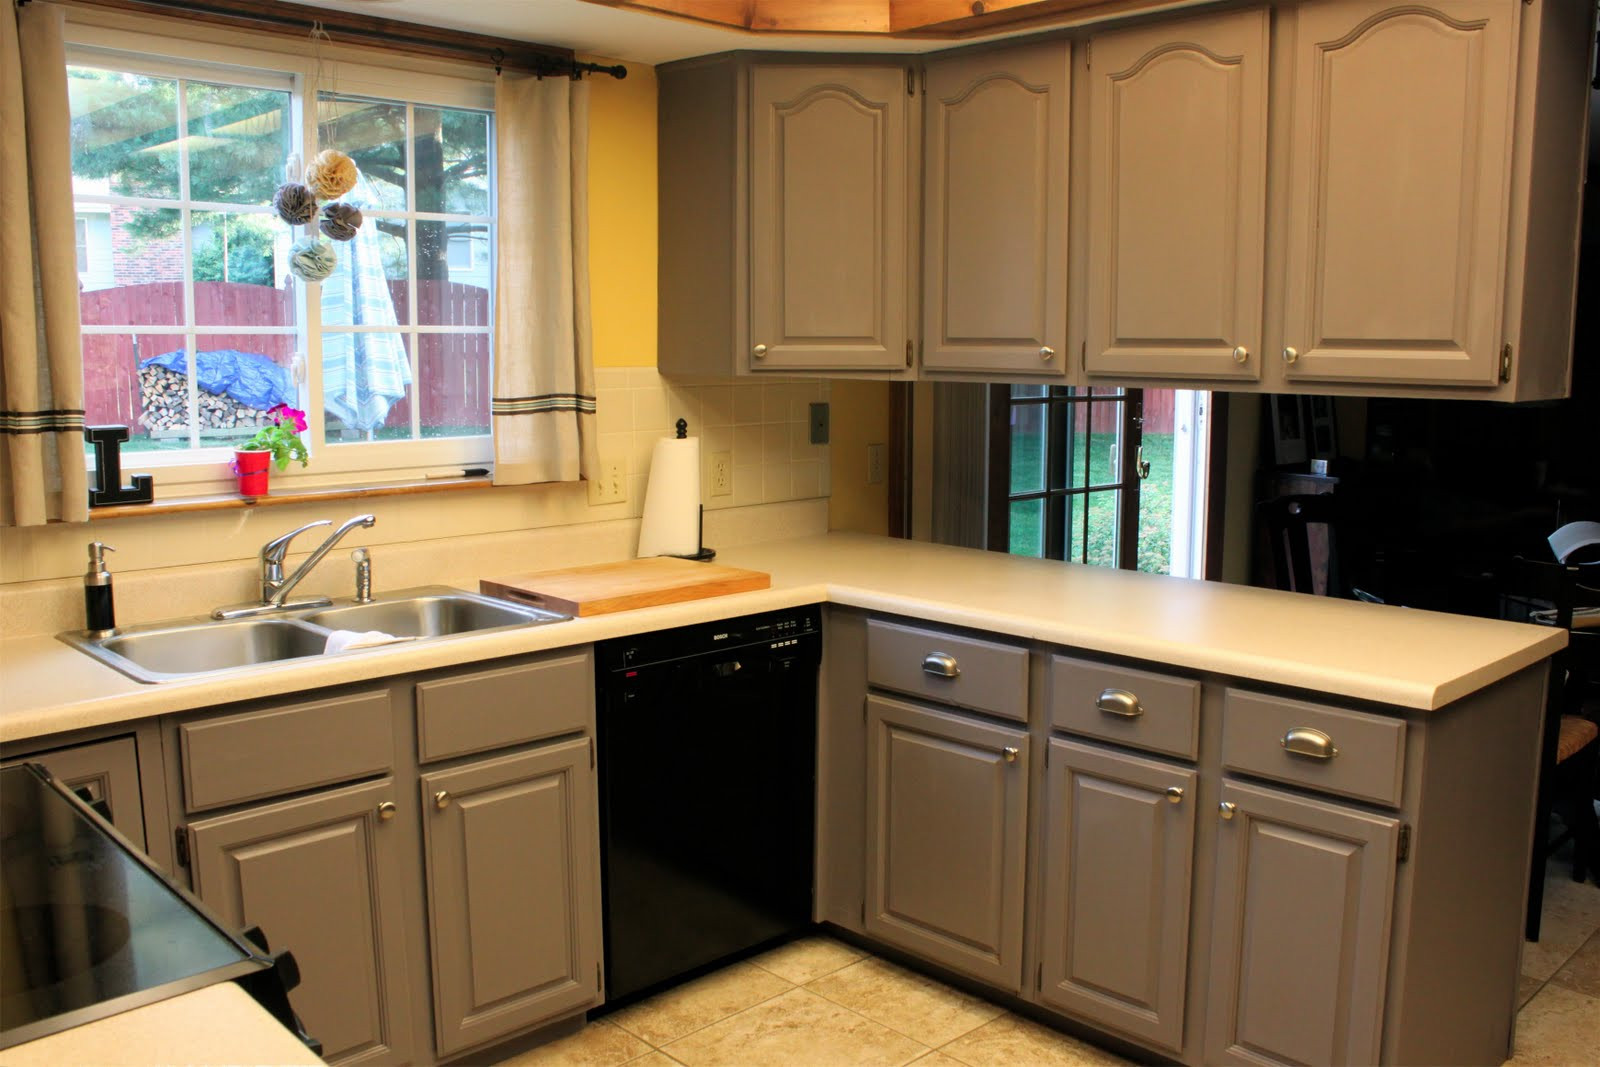 Home Depot Kitchen Cabinet Paint
 645 workshop by the crafty cpa work in progress painting